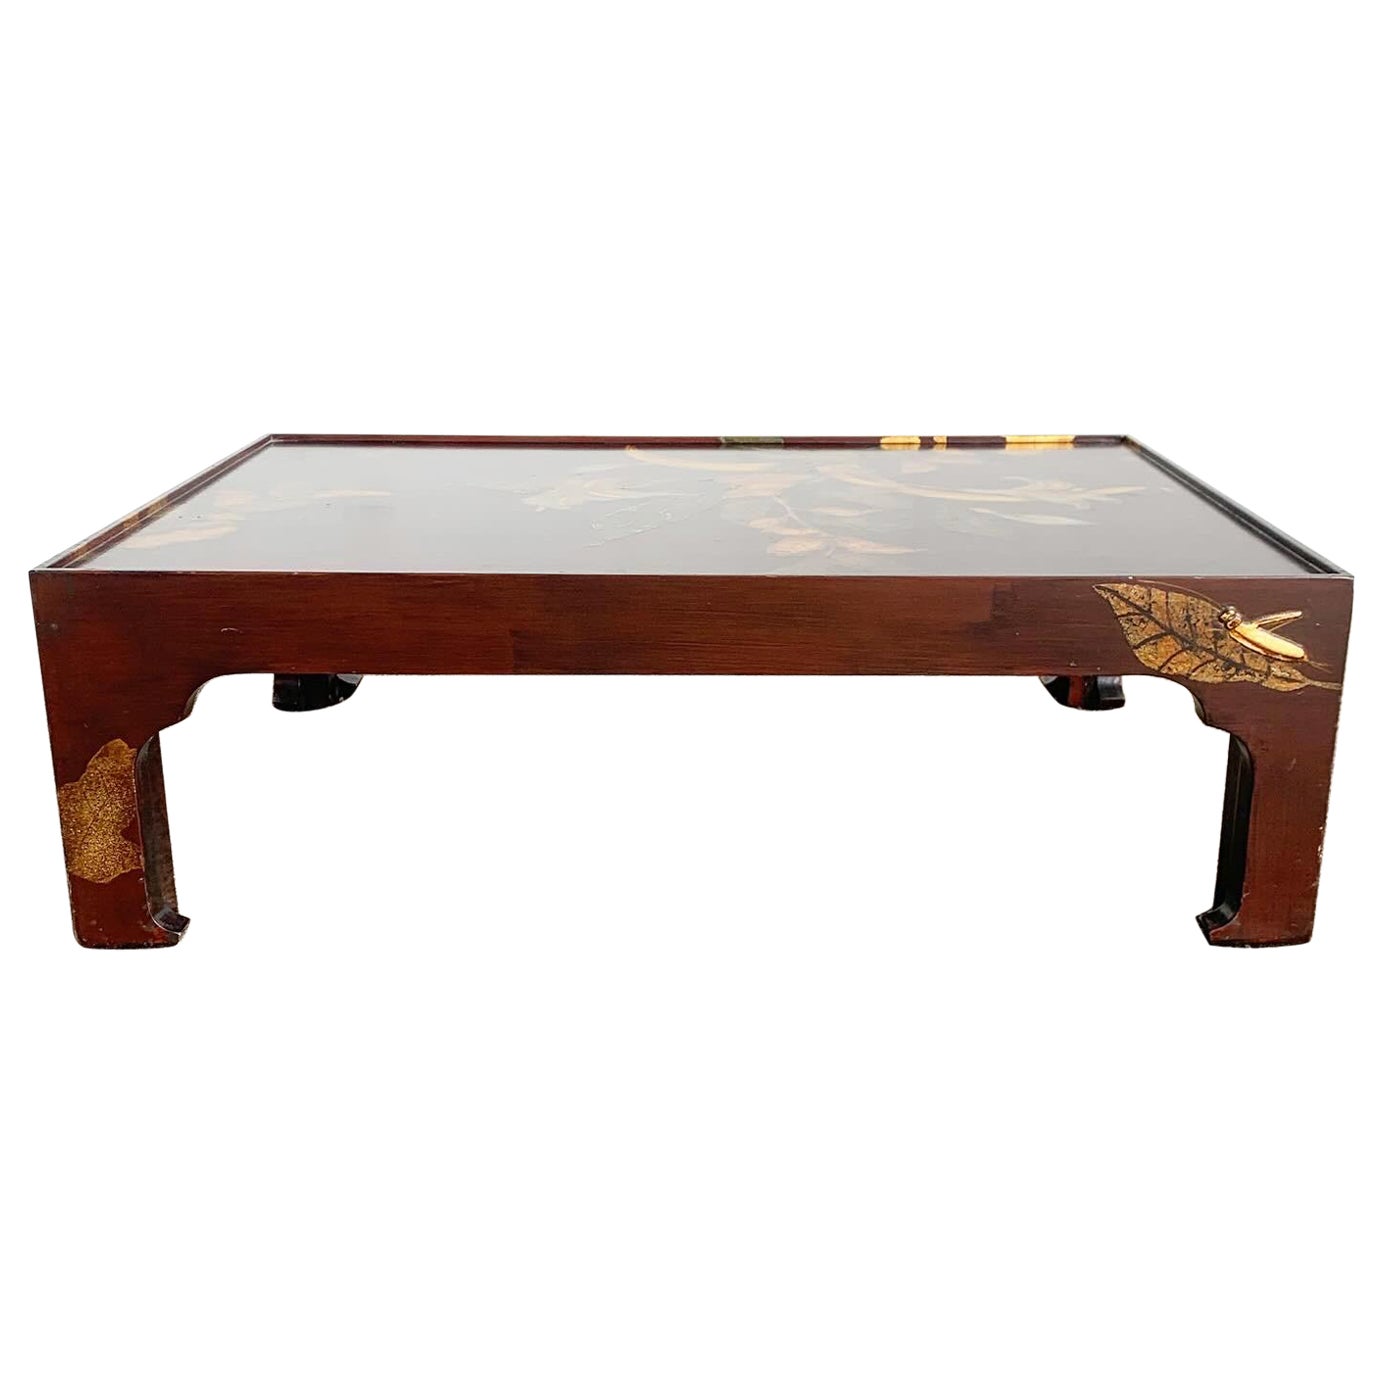 Vintage Asian Wooden Inlayed Asian Prayer Table For Sale